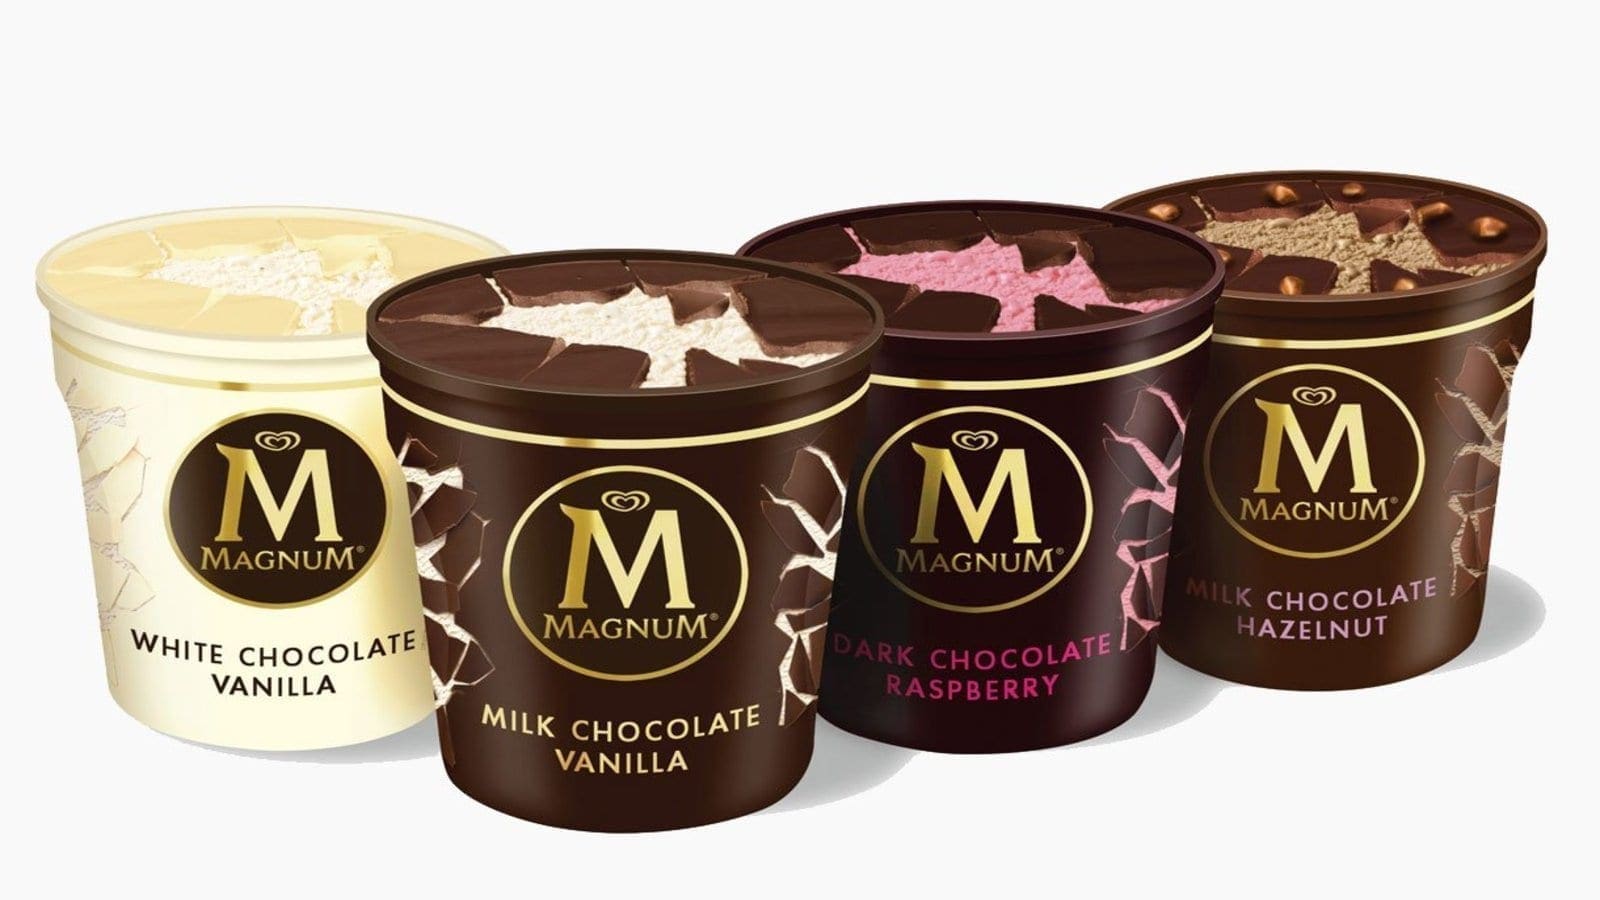 Leading chocolate ice-cream brand Magnum commits to planting 465,000 trees in Ivory Coast